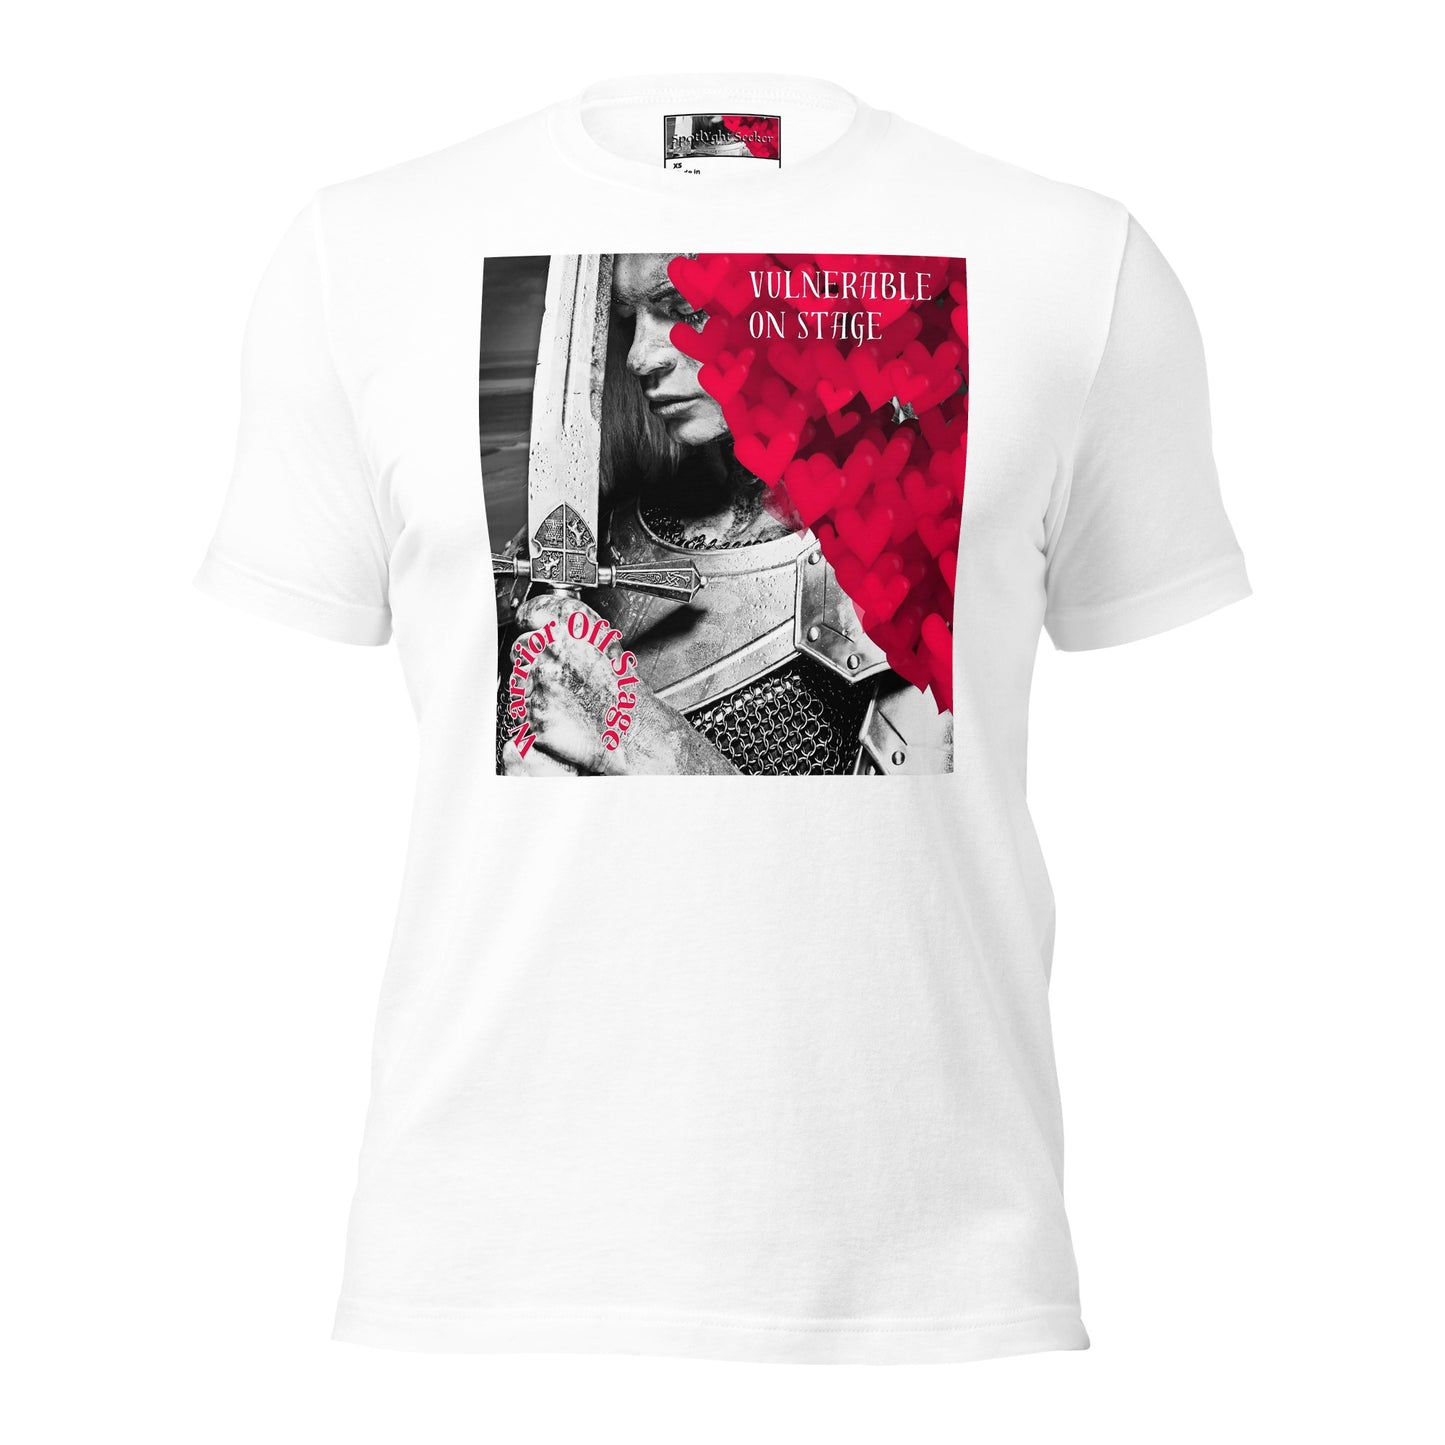 A bold and stylish Unisex Artist Vulnerable Warrior T-Shirt in Classic design, specifically crafted for Female Artists The shirt features empowering graphics, celebrating authenticity on stage and fierce warrior strength off stage. Perfect for making a statement in the world of art and beyond. White Tee.